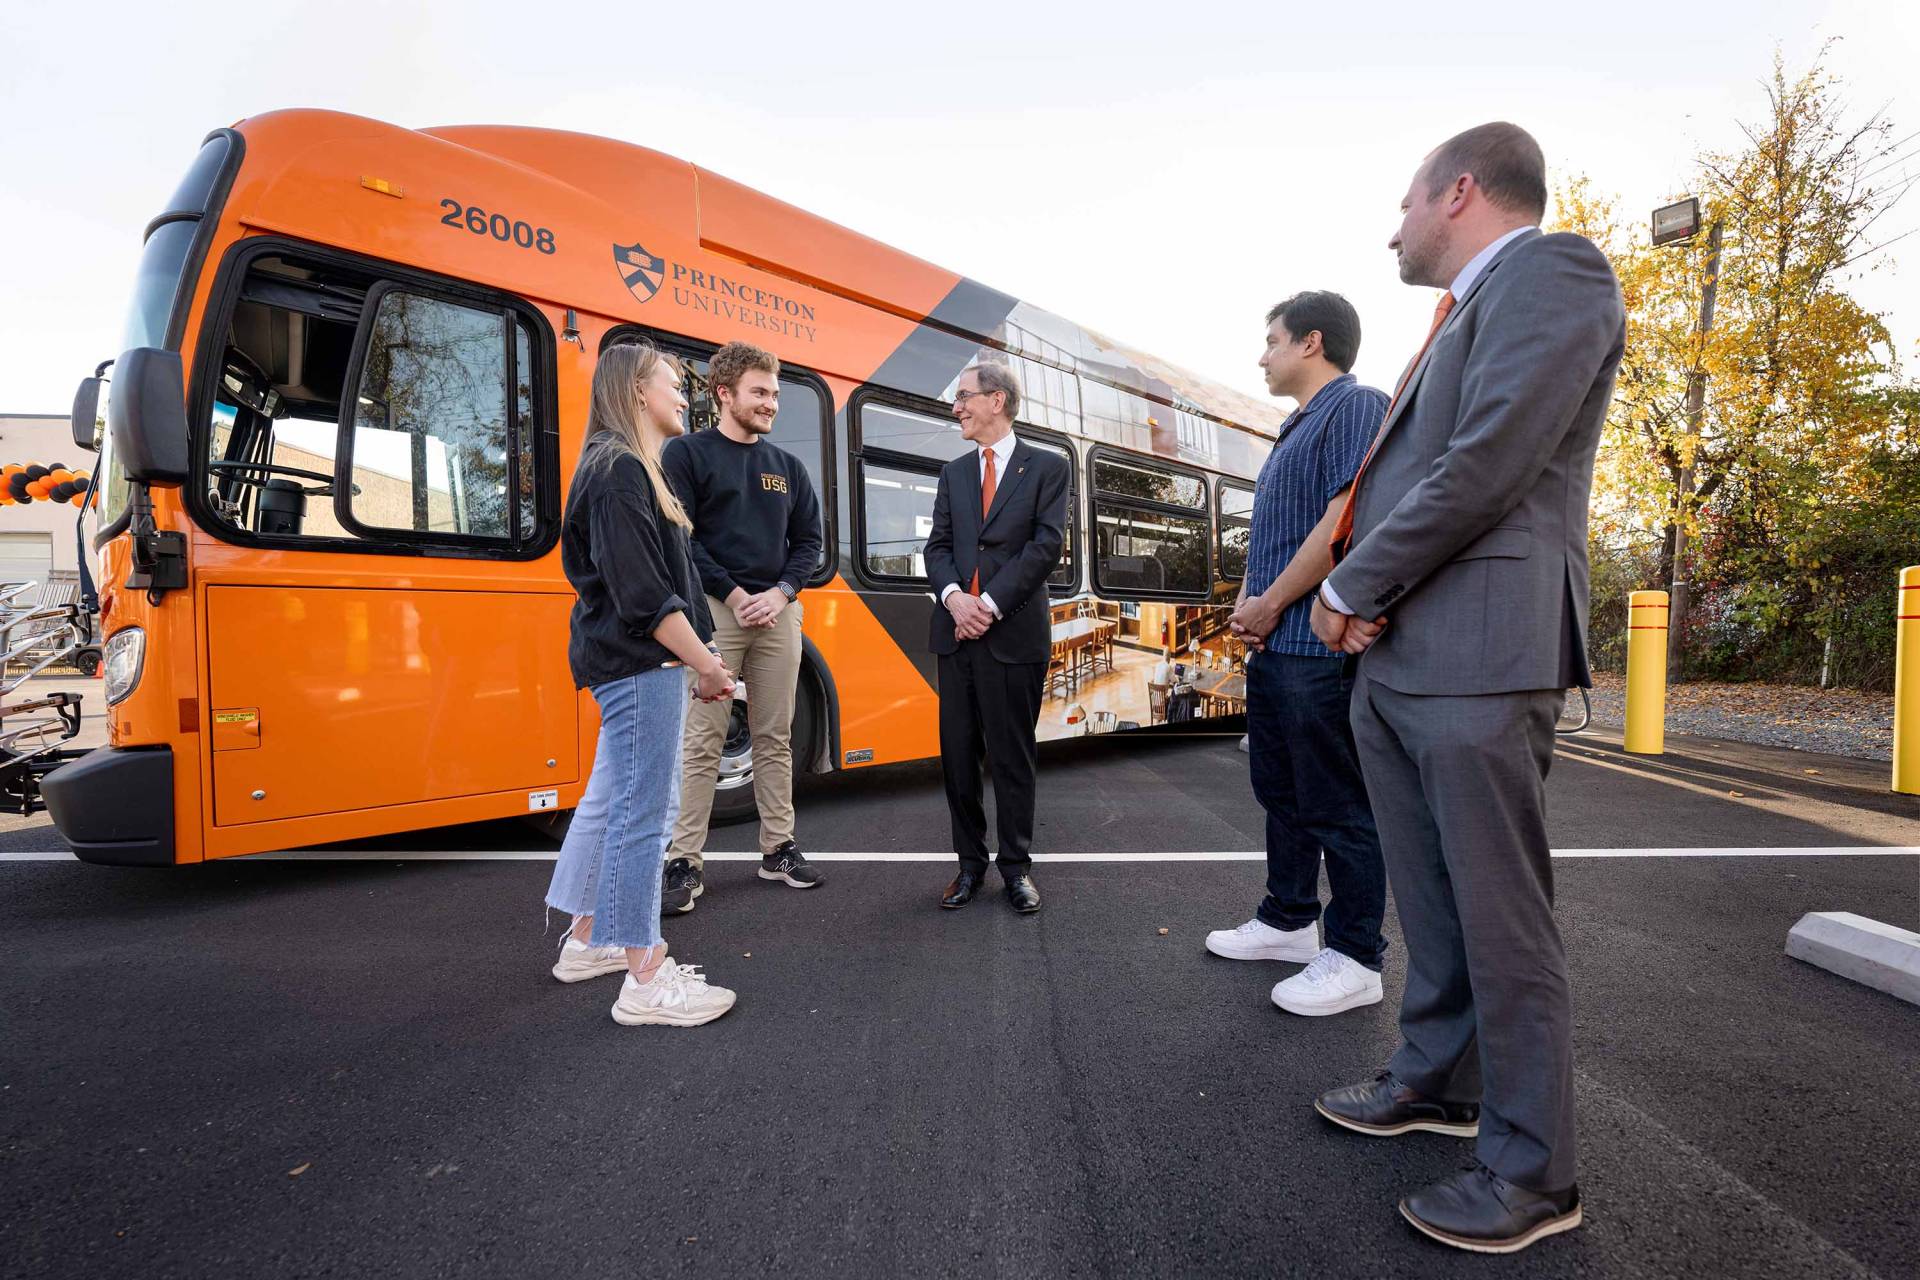 President Eisgruber standing in front of an electric bus with other people